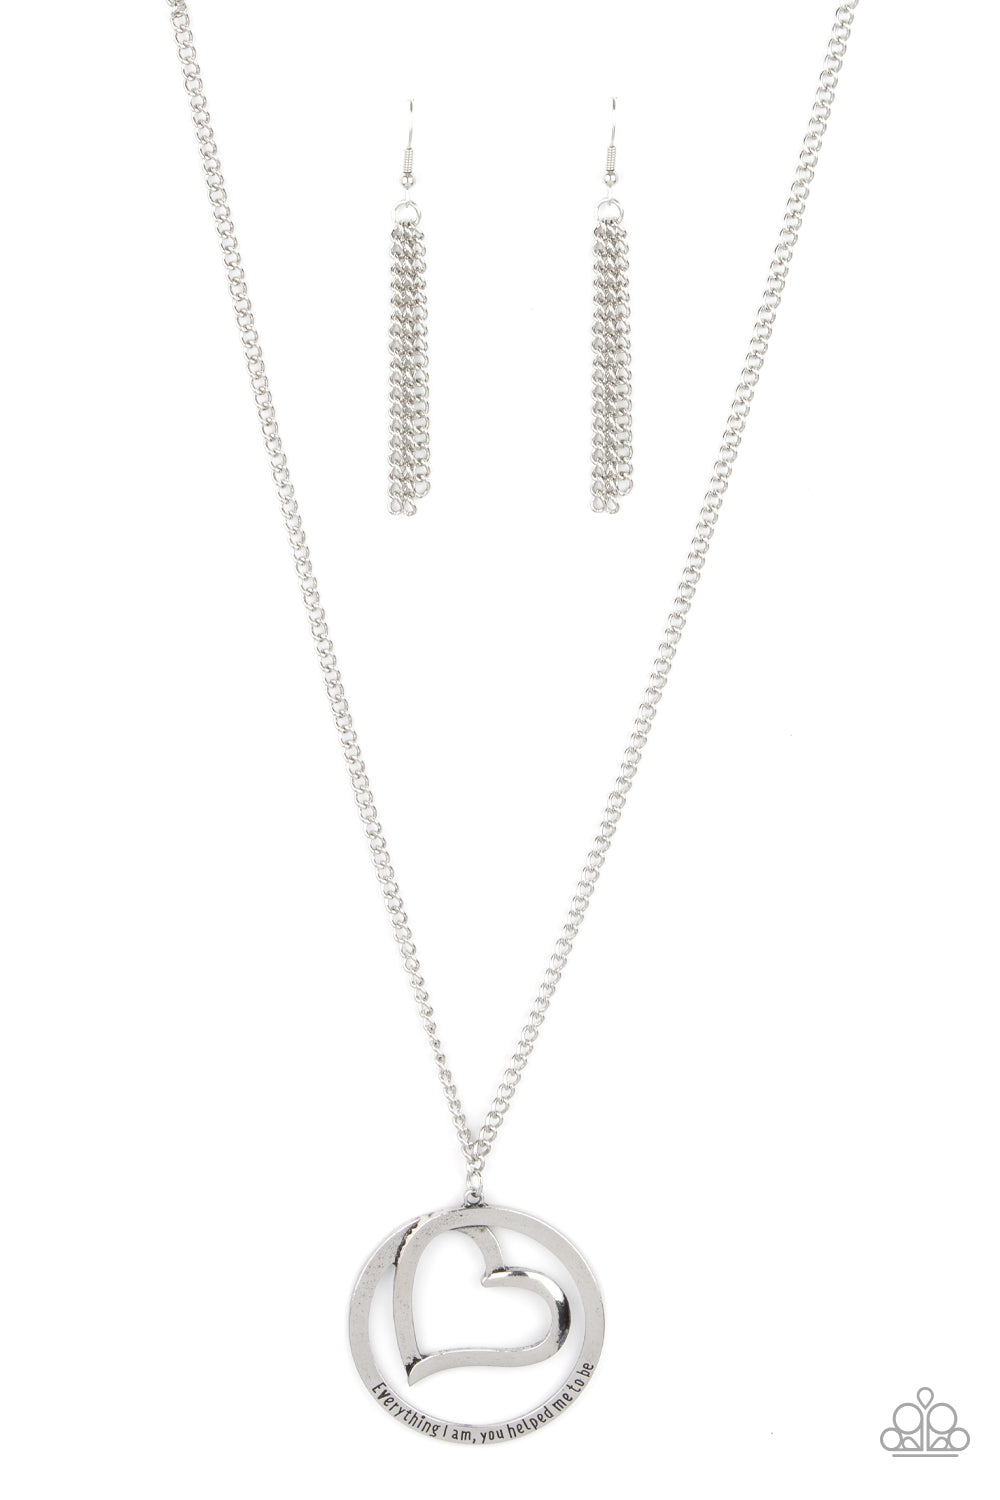 Paparazzi - Positively Perfect - Silver Necklace